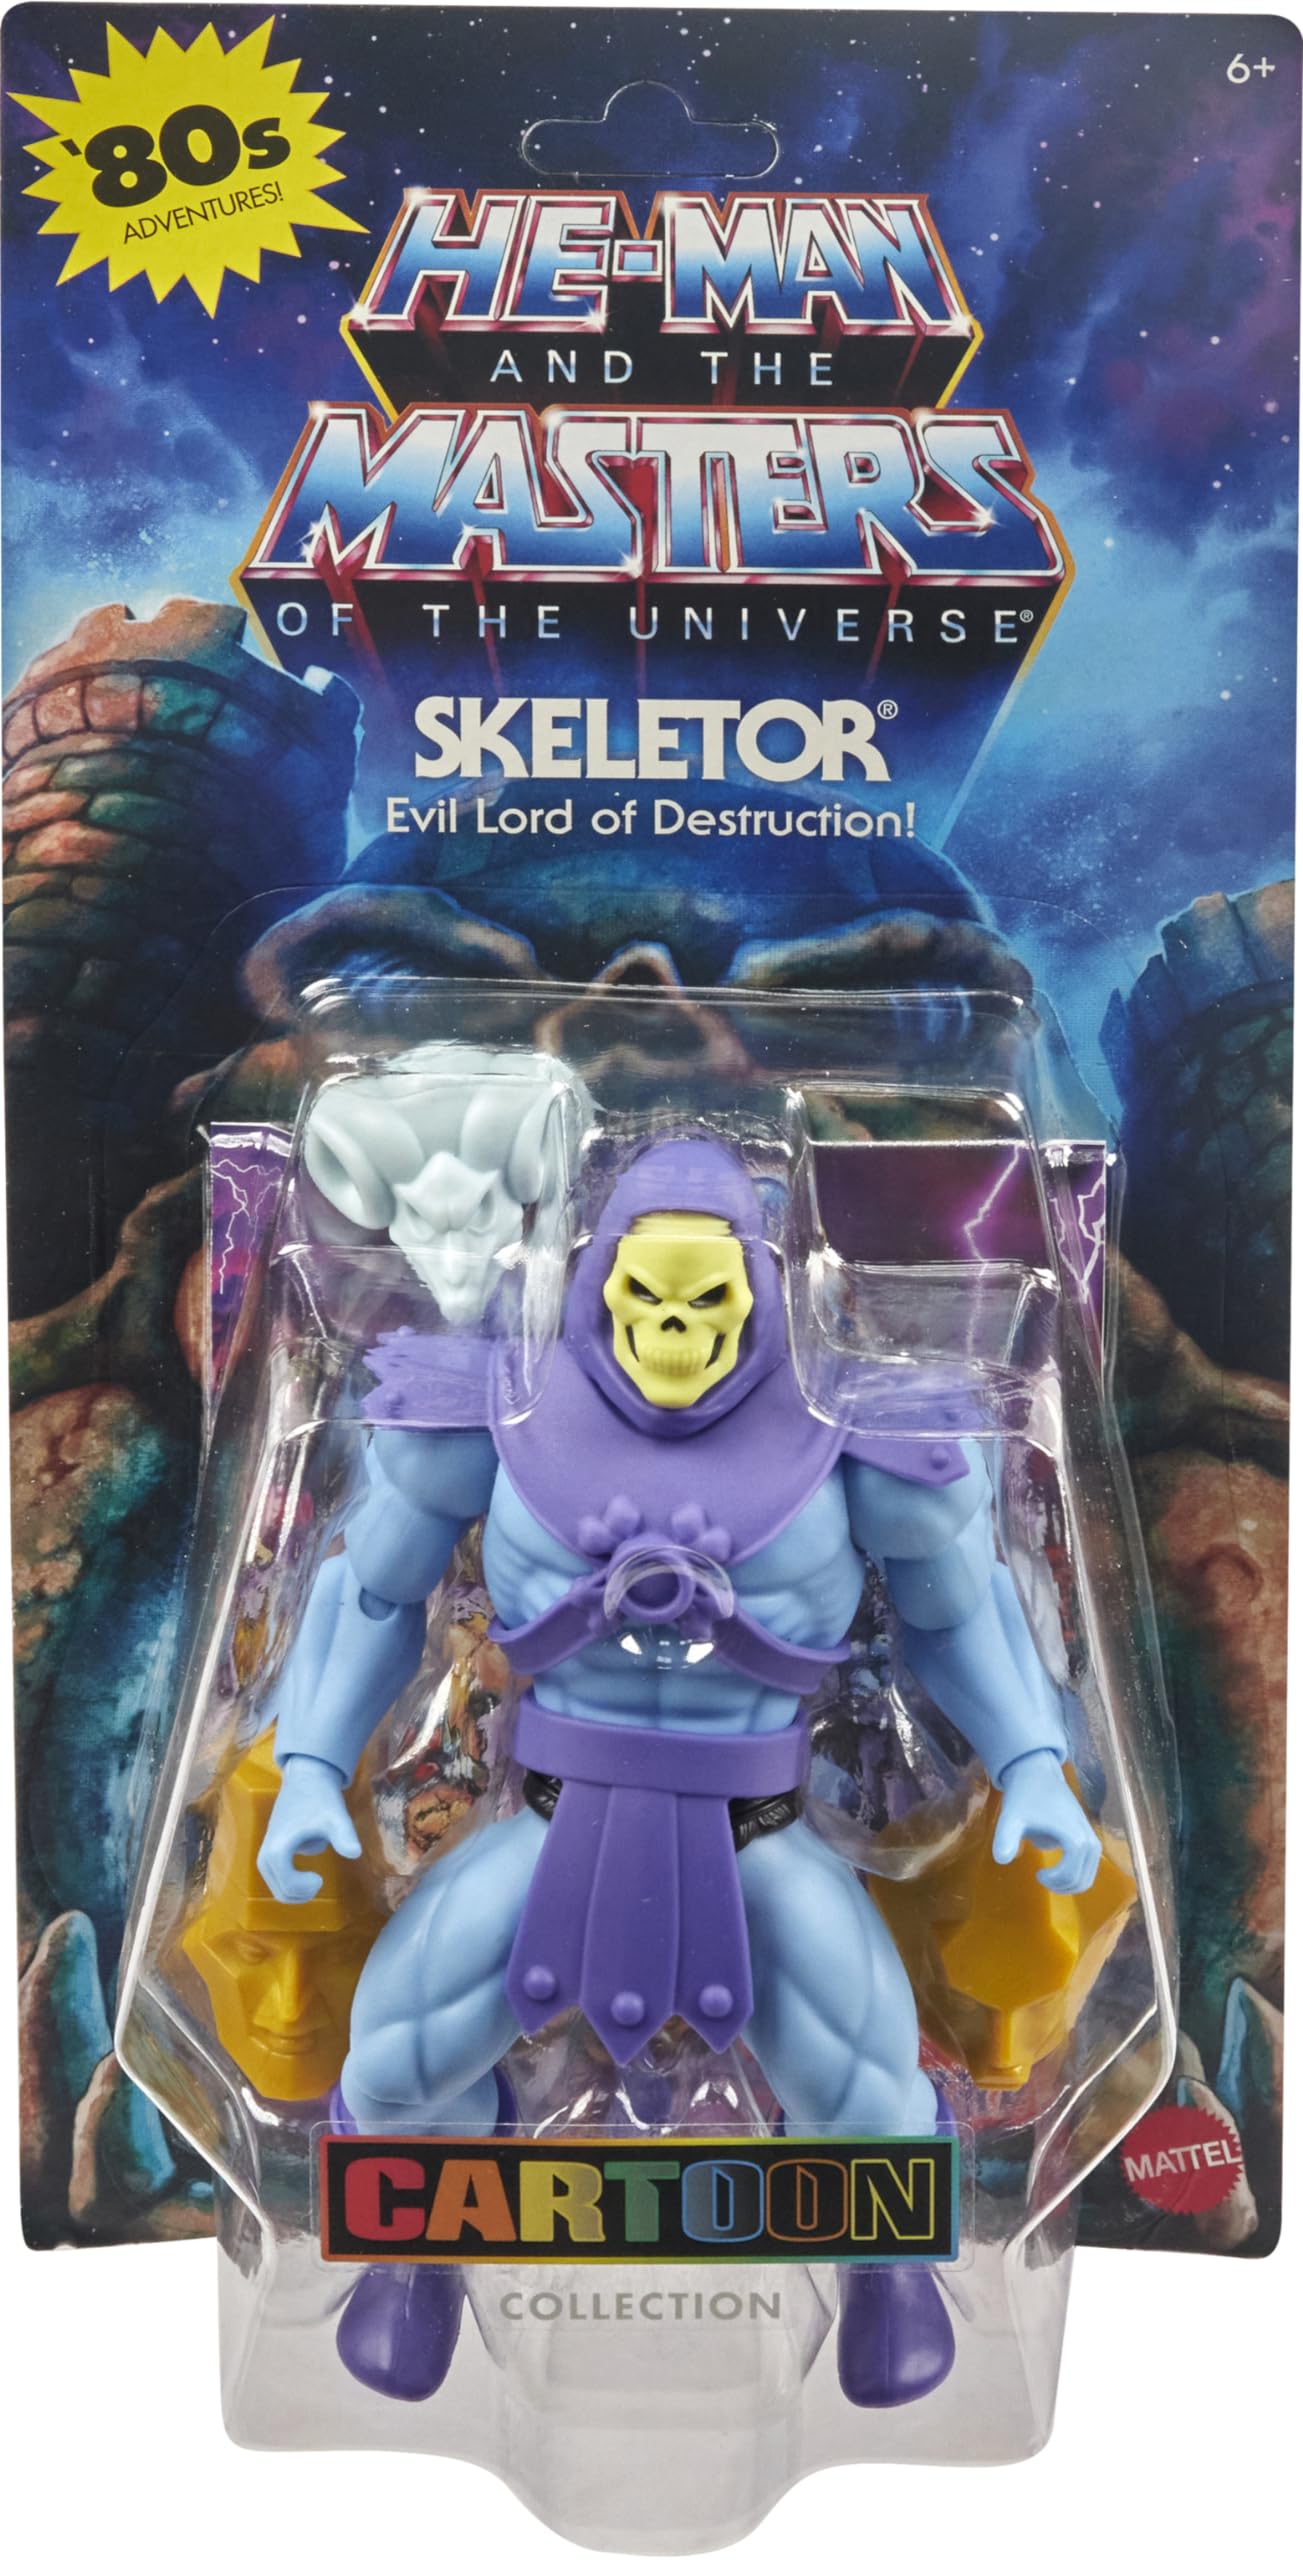 Masters of the Universe Origins Toy, Cartoon Collection Skeletor Action Figure, 5.5-inch Scale Villain with Armor, Staff, Sword & 2 Masks